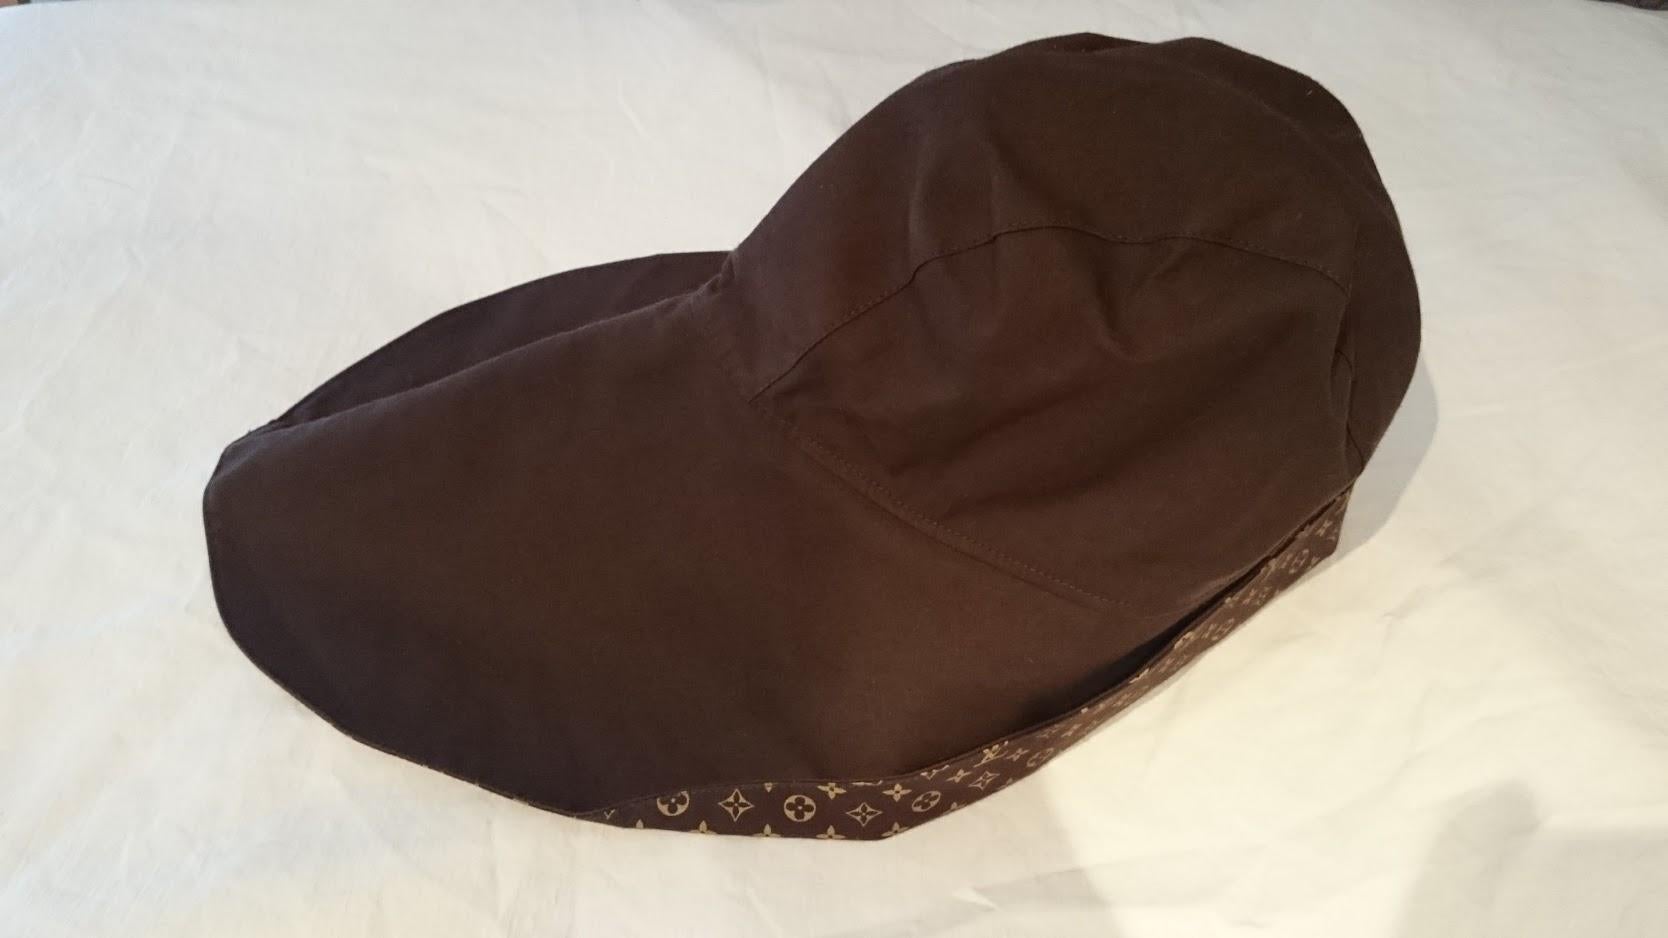 Louis Vuitton waterproof hat. 
Unisex
100%  Cotton
New with the original tickets still attached. 
SIZE: S / M - lenght 47, head circumference 52 cm.
TO CONVERT: cm x 0.39 = inch.
Made in Scotland